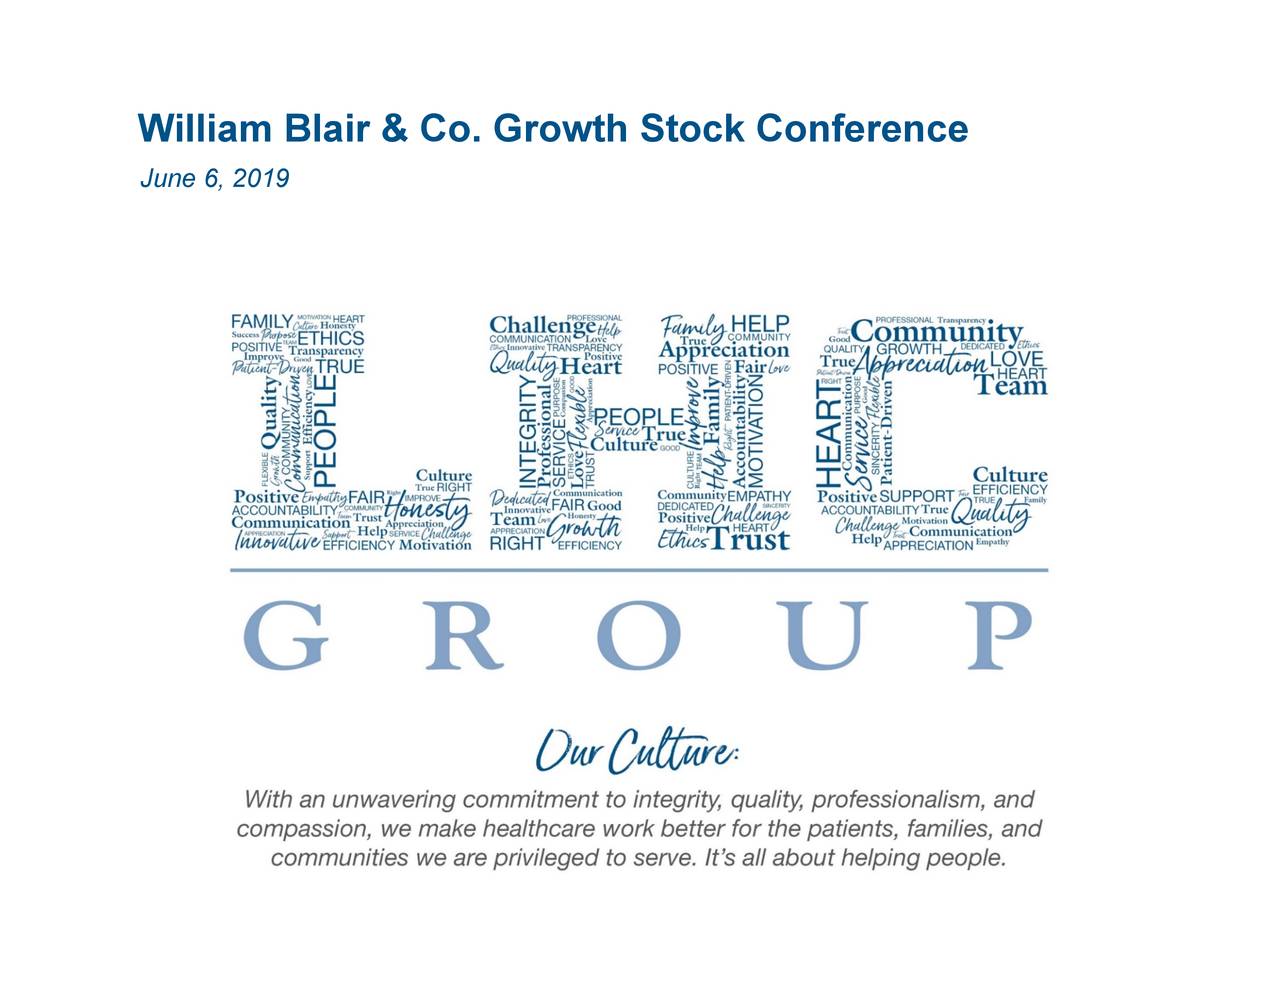 LHC Group (LHCG) Presents At William Blair Growth Stock Conference